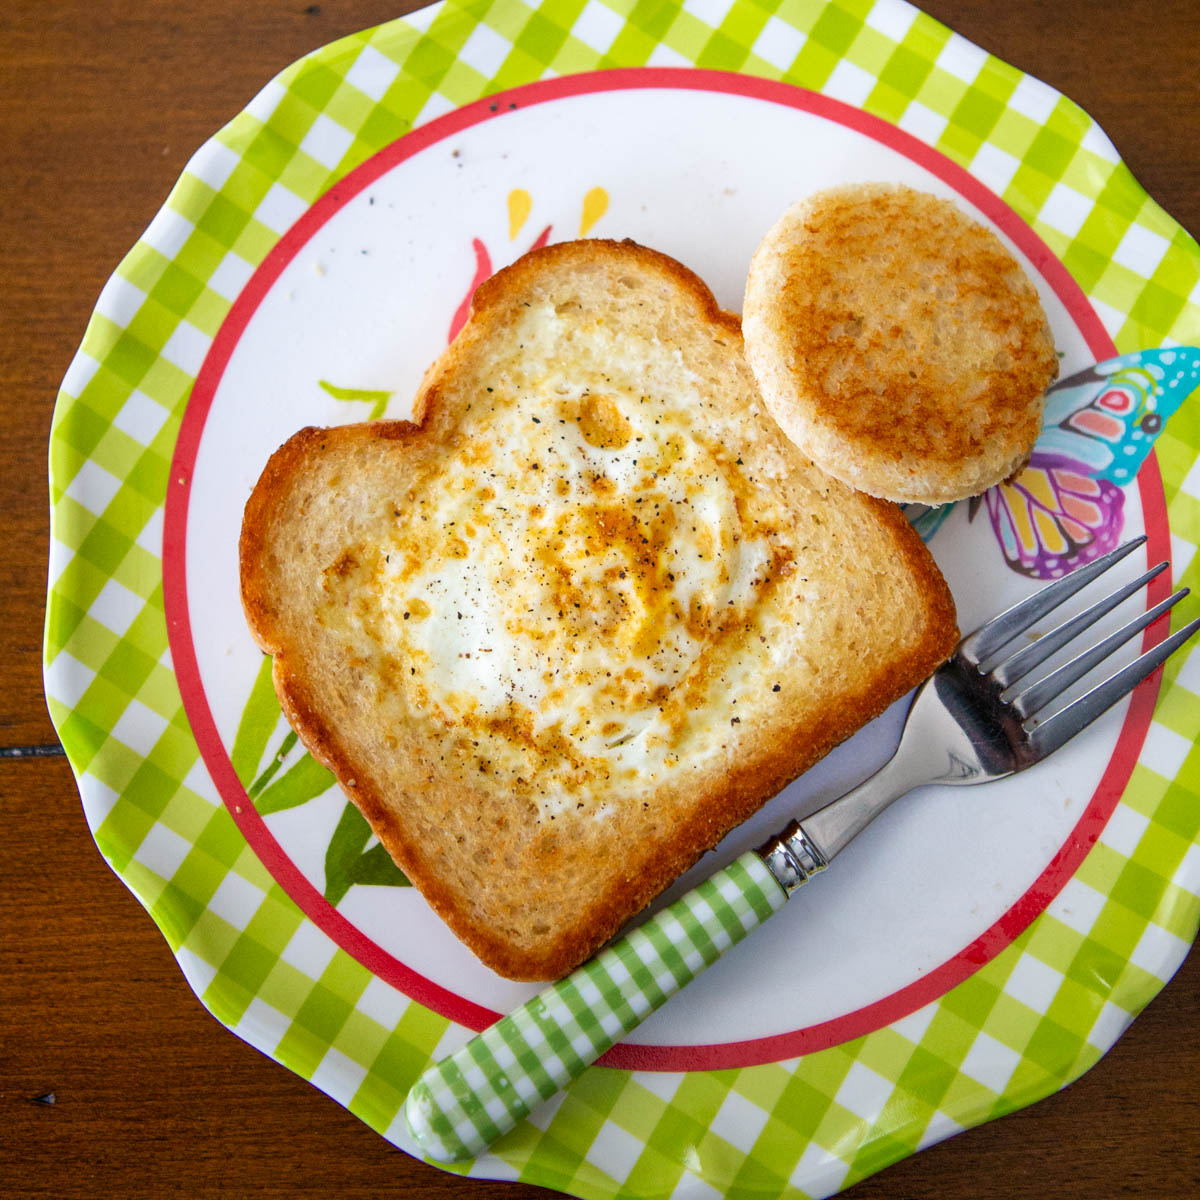 The finished egg in a basket toast is on a plate with a fork.